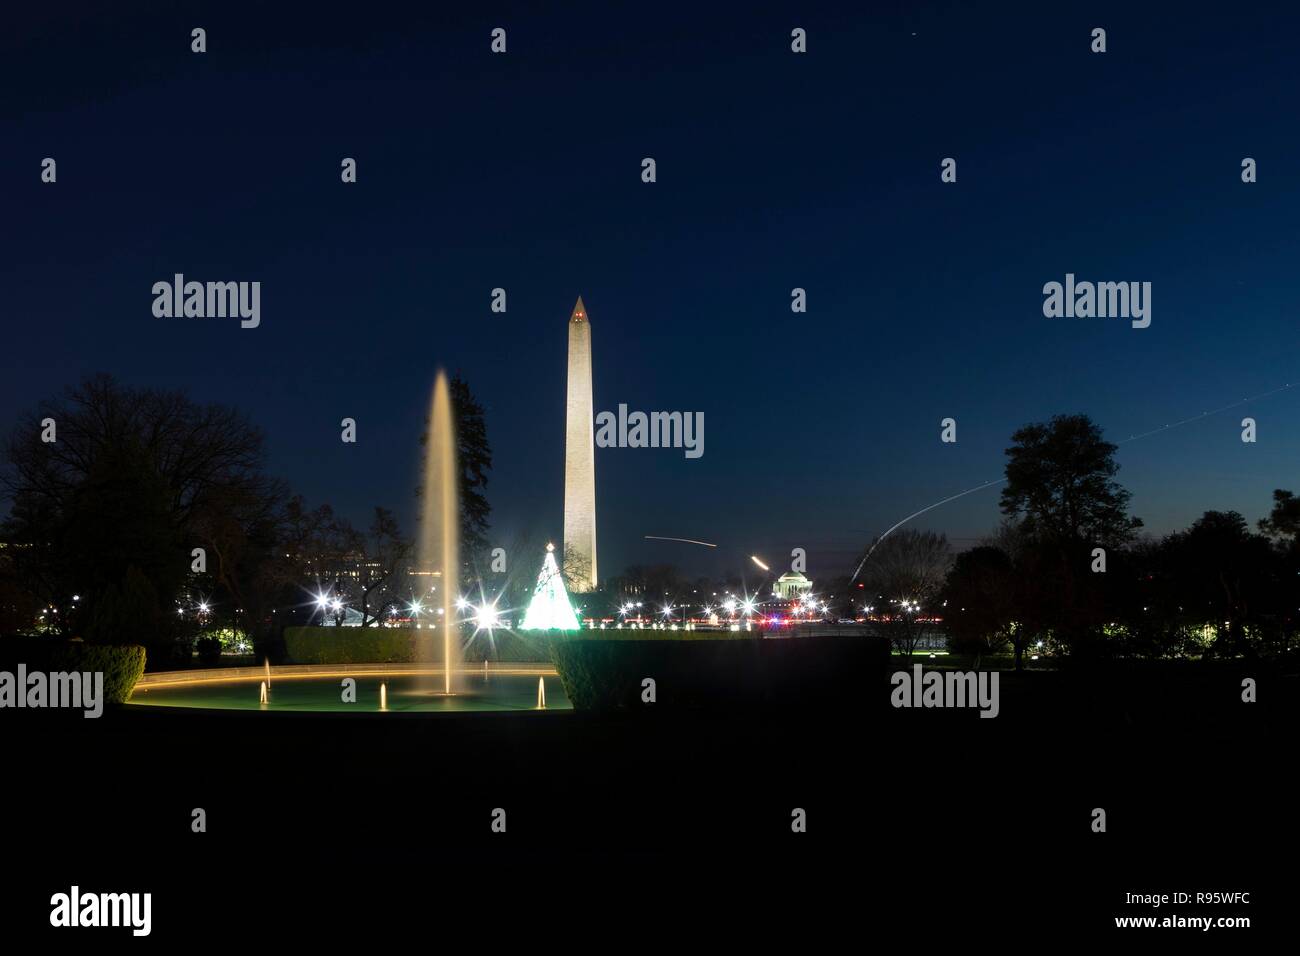 View of the Washington Monument and National Mall from the South Lawn of the White House decorated for Christmas and lighted at night December 12, 2018 in Washington, DC. The light streaks are commercial airplanes taking off from Reagan National Airport on the Potomac River. Stock Photo